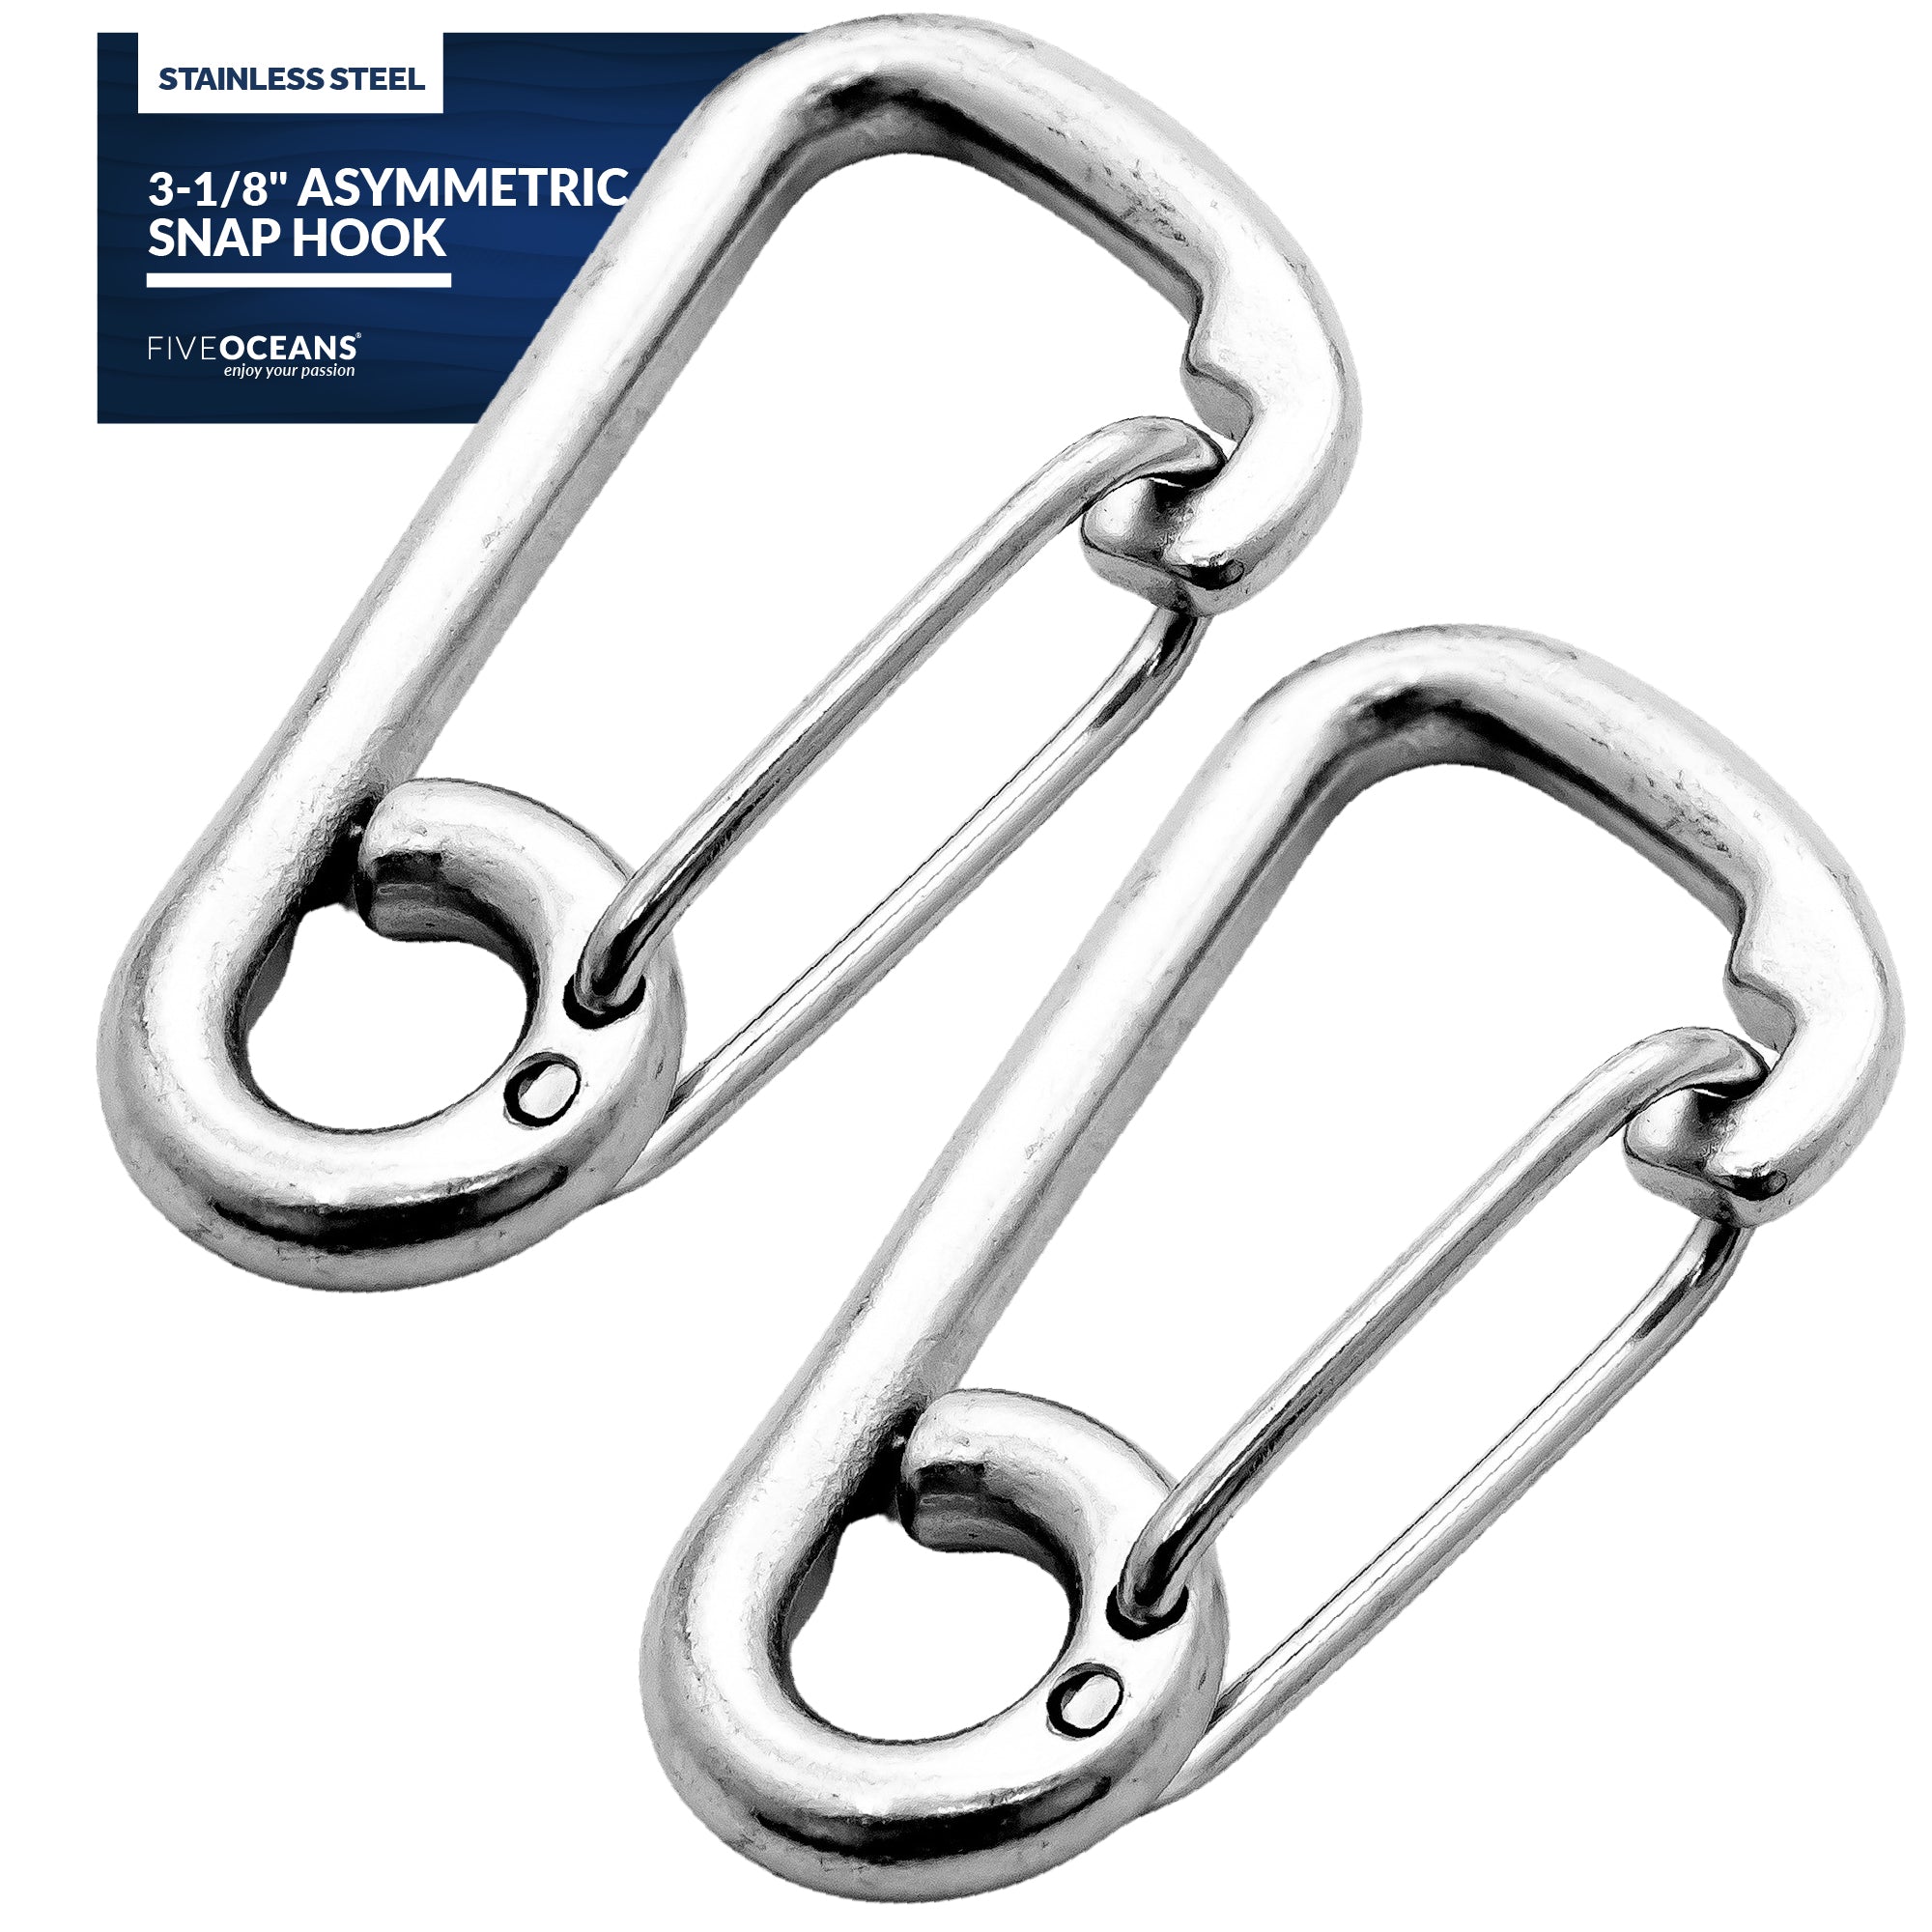 Five Oceans Asymmetric Snap Hook, 3-5/32 Inches (Two-Pack) Fo465-m2